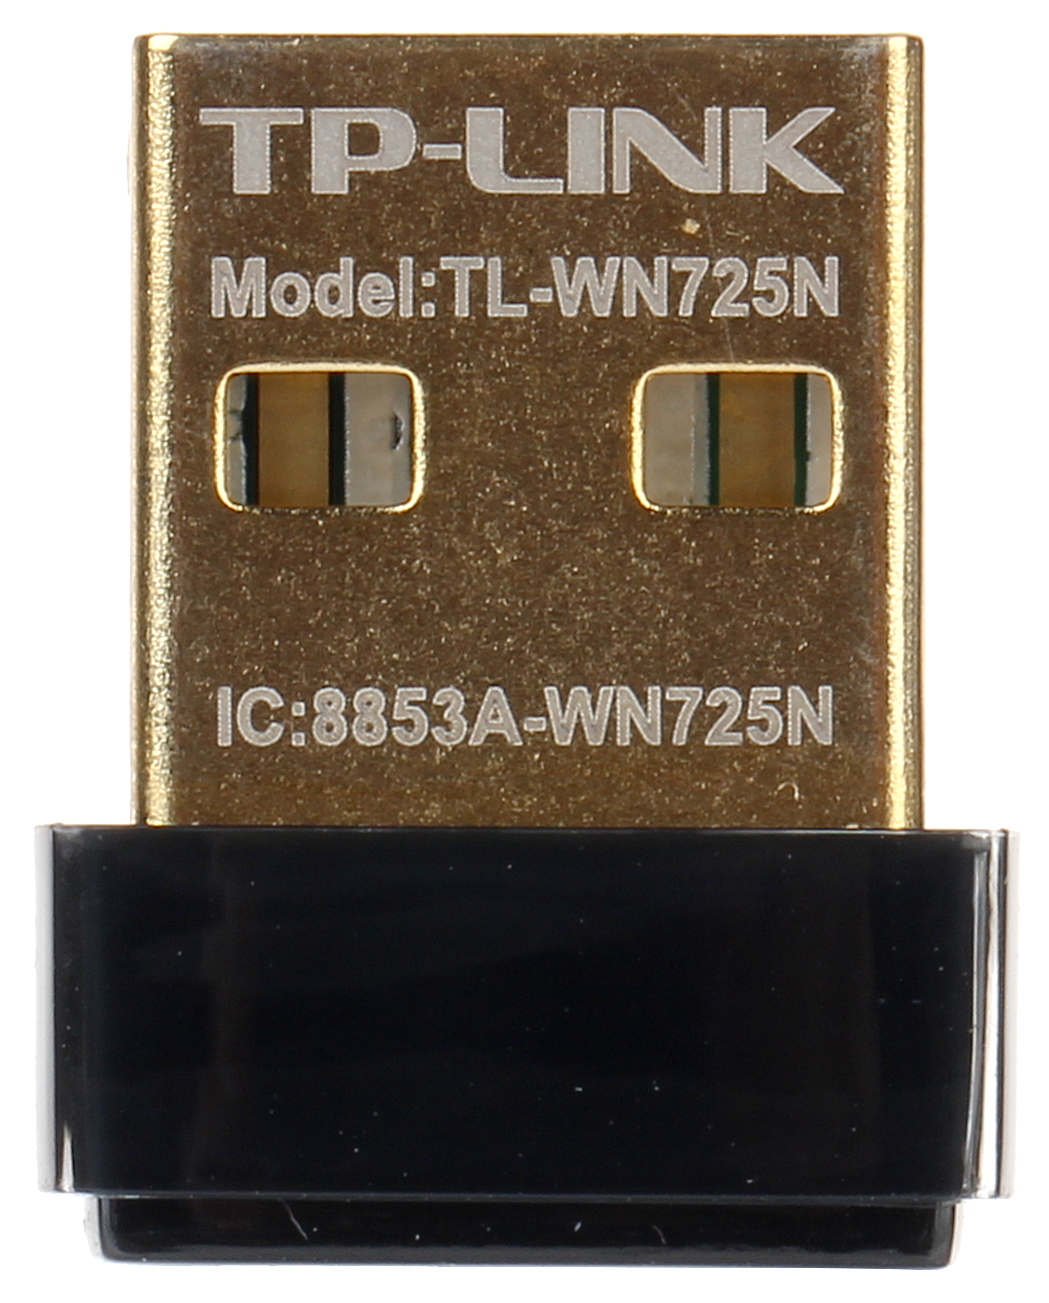 WLAN USB ADAPTER TL-WN725N 150 Mbps TP-LINK - 2.4 GHz and 5 GHz Wireless  Card Adapters - Delta